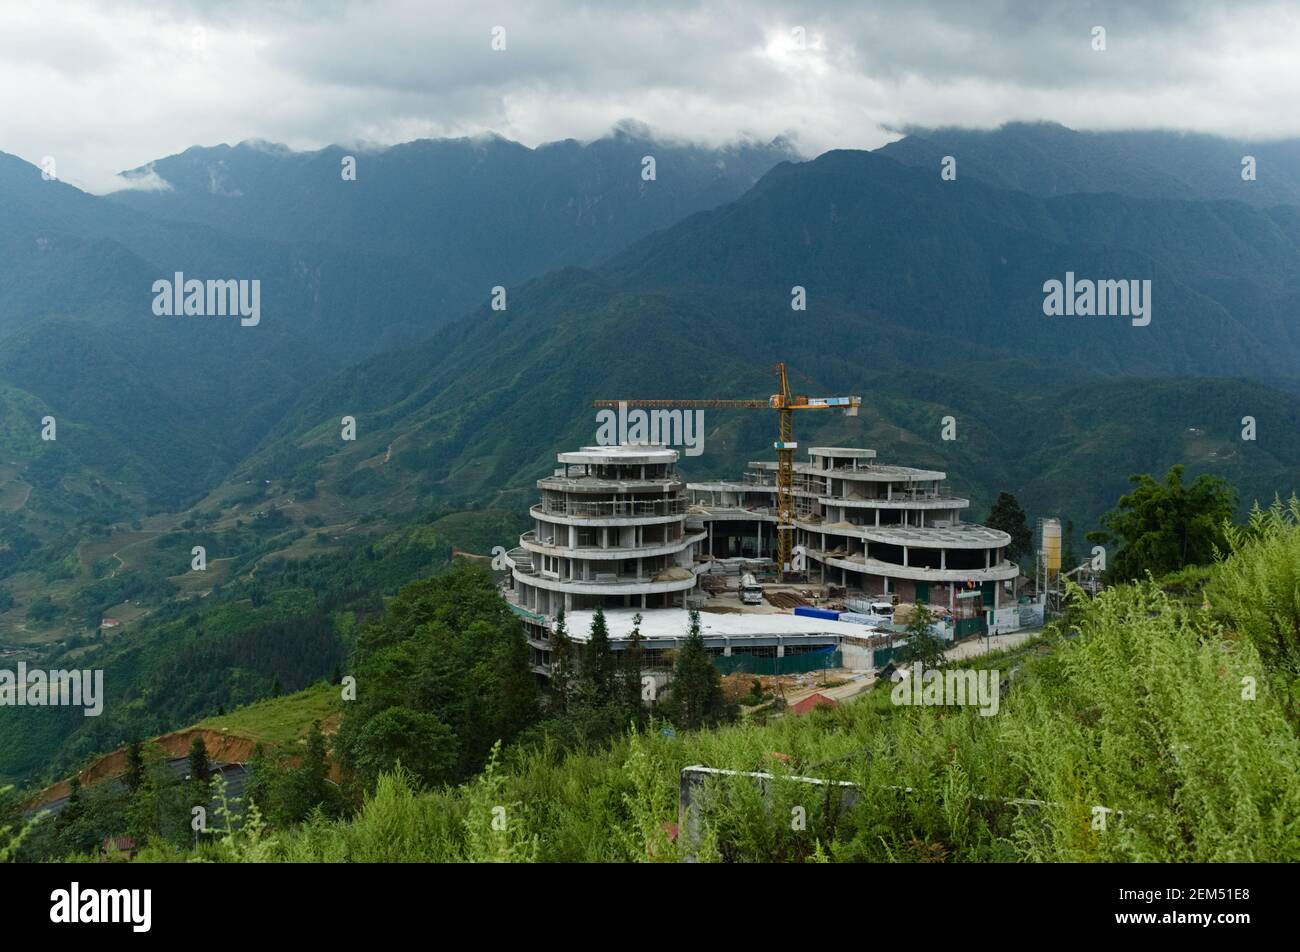 Construction site with crane. Building activity on the hill on background of mountain range. Stunning landscape with terraces near Sa Pa city. Vietnam Stock Photo